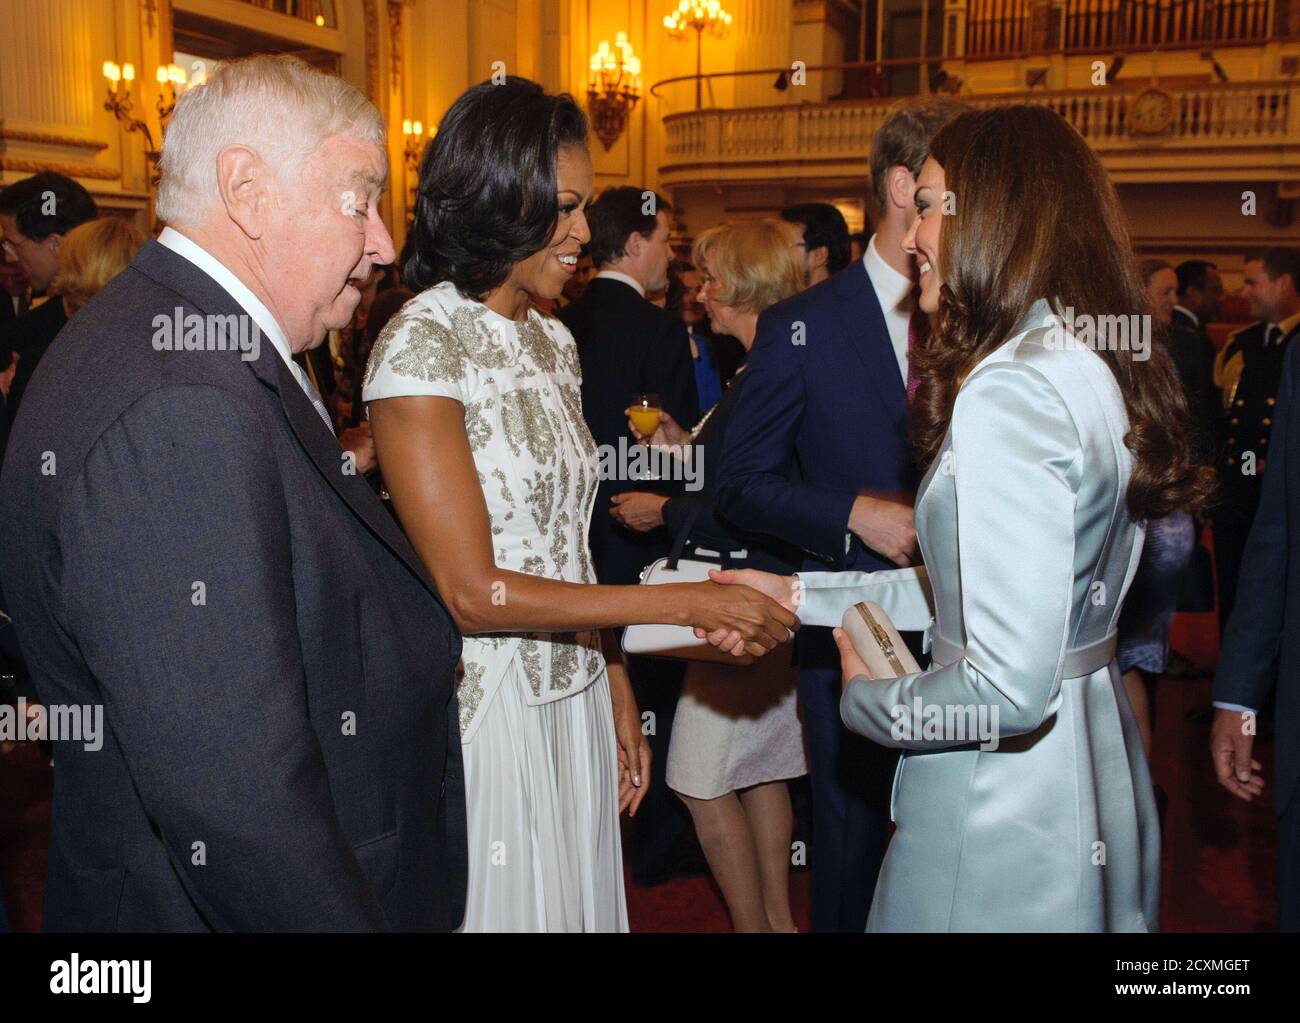 U.S. First Lady Michelle Obama (2nd L) and U.S. Ambassador Louis Susman (L) meet Catherine, the Duchess of Cambridge, during a reception at the Buckingham Palace, London July 27, 2012, to welcome the Heads of State and Heads of Government to the United Kingdom before they travel to the Olympic Stadium for the opening ceremony of the London 2012 Olympic Games. REUTERS/Dominic Lipinski/PA Wire (BRITAIN - Tags: ROYALS POLITICS SPORT OLYMPICS) Stock Photo